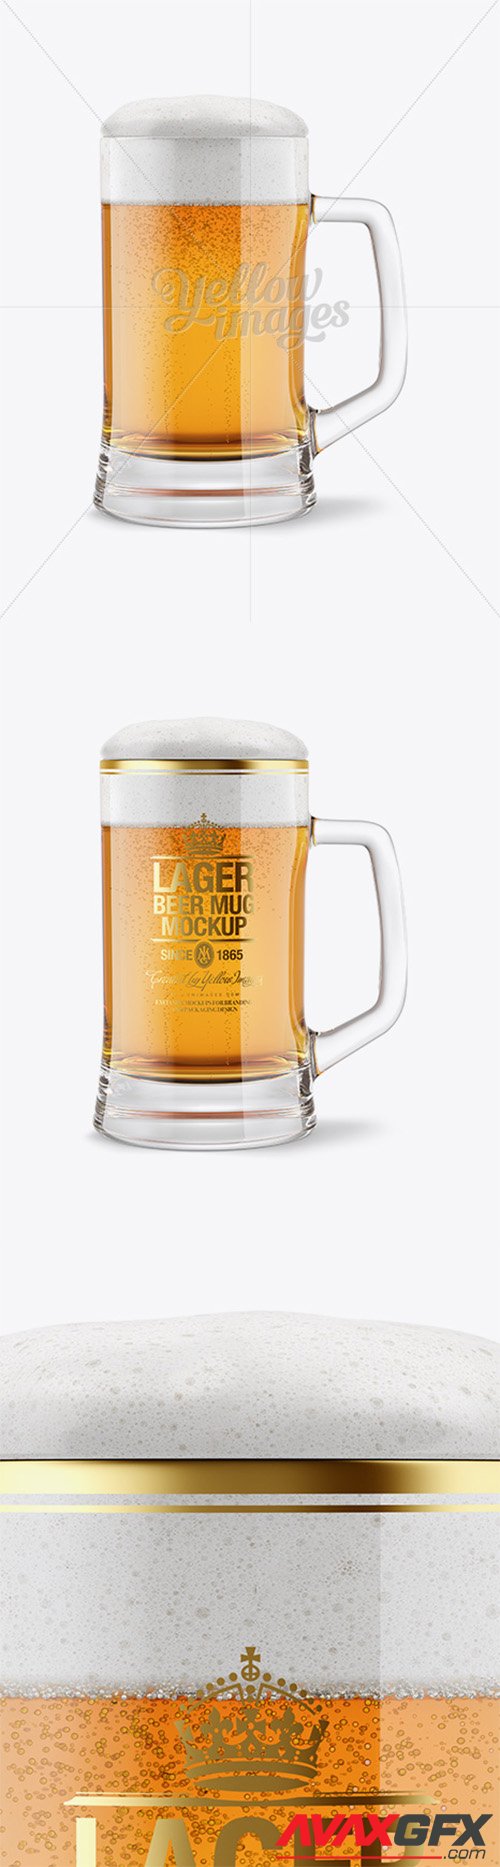 Download Tankard Glass Mug With Lager Beer Mockup 14664 Avaxgfx All Downloads That You Need In One Place Graphic From Nitroflare Rapidgator Yellowimages Mockups